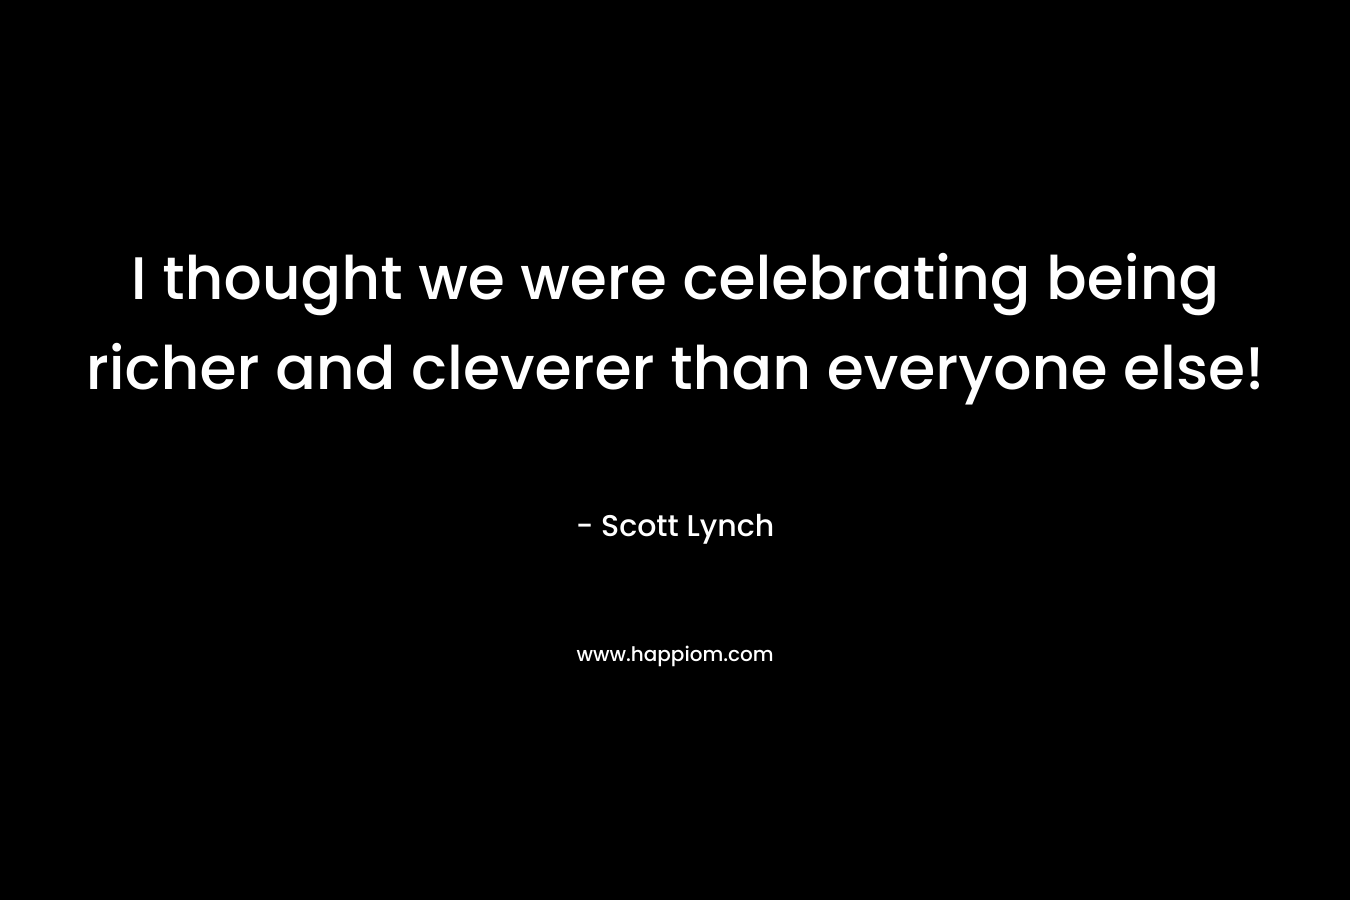 I thought we were celebrating being richer and cleverer than everyone else! – Scott Lynch